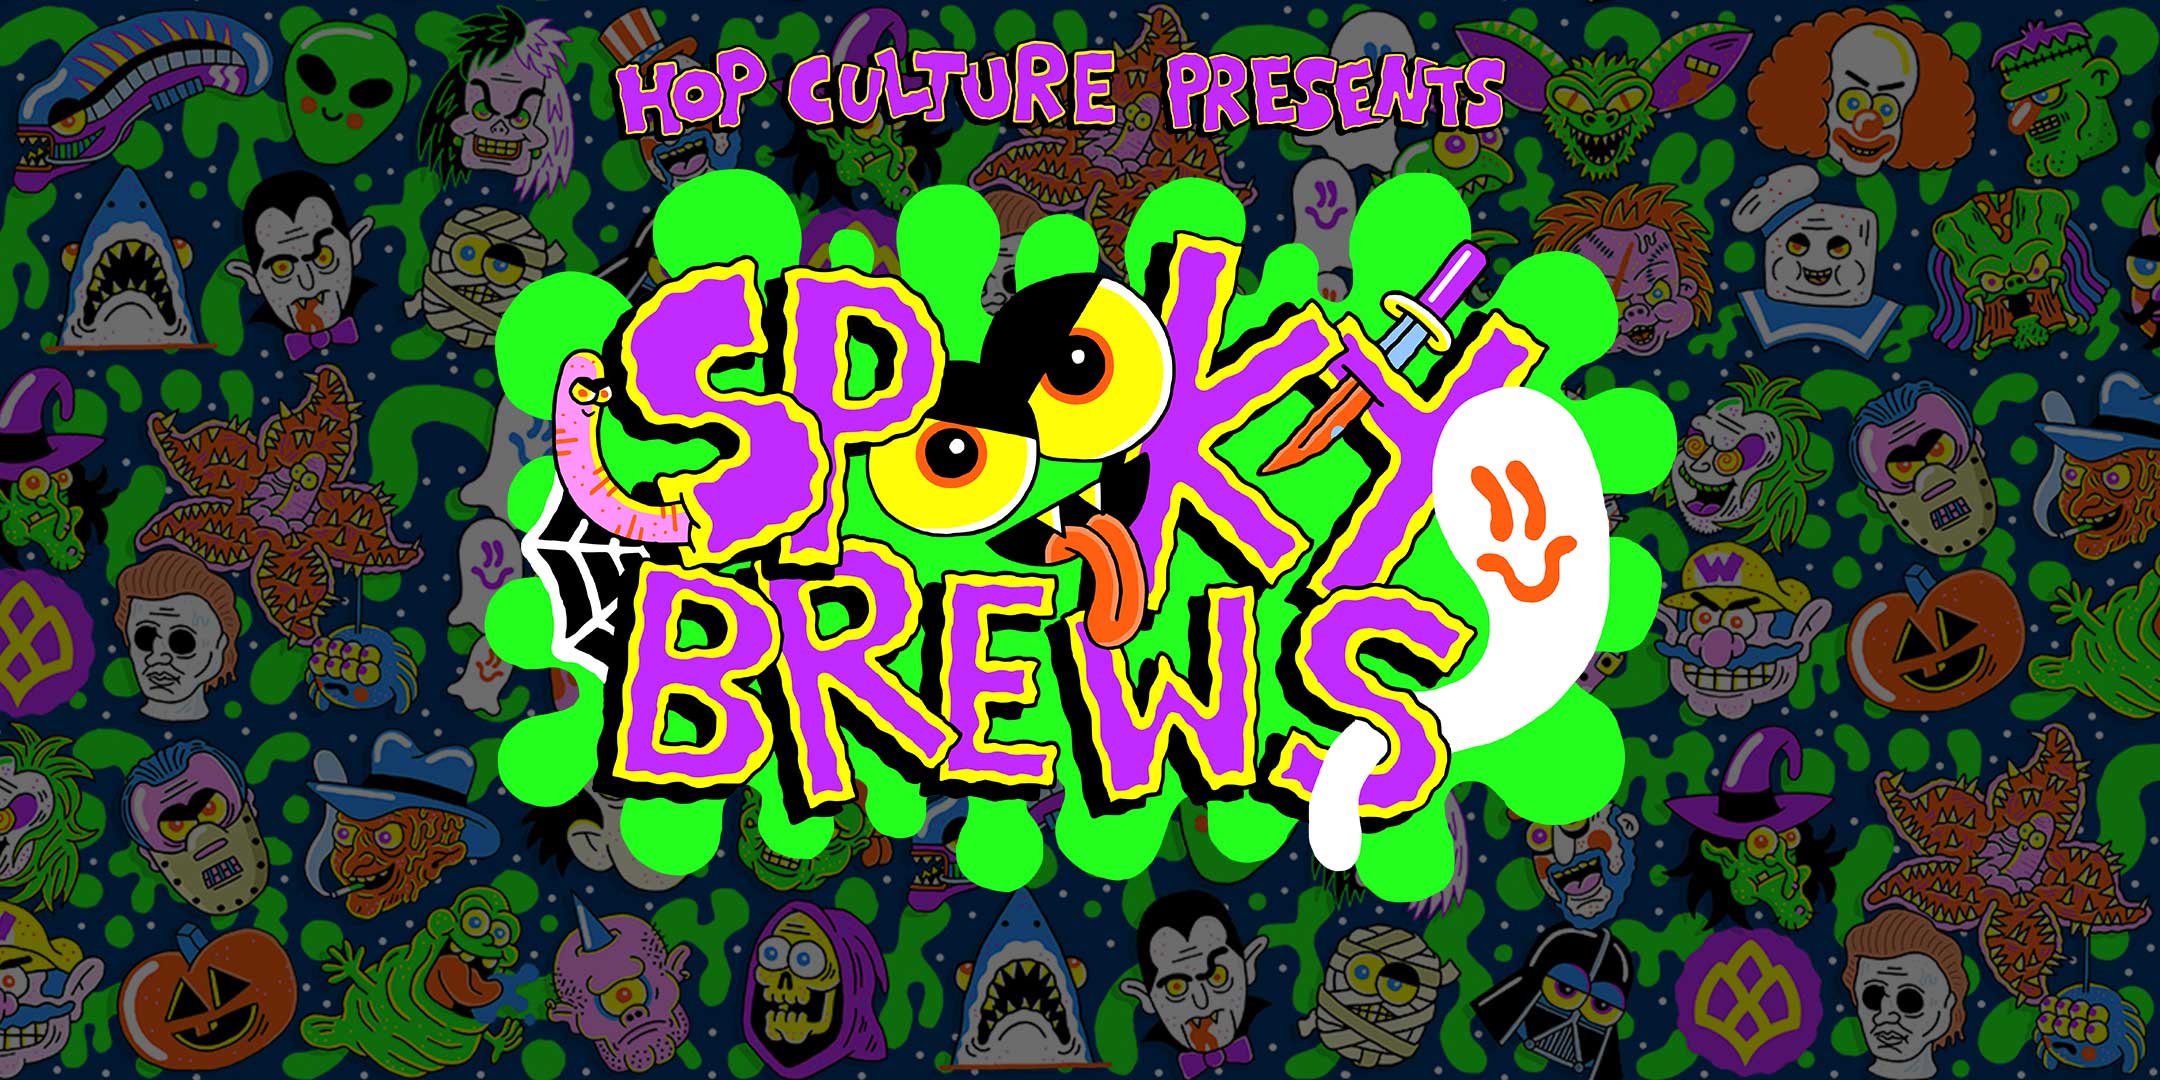 Here’s What to Drink at Spooky Brews Vol. II